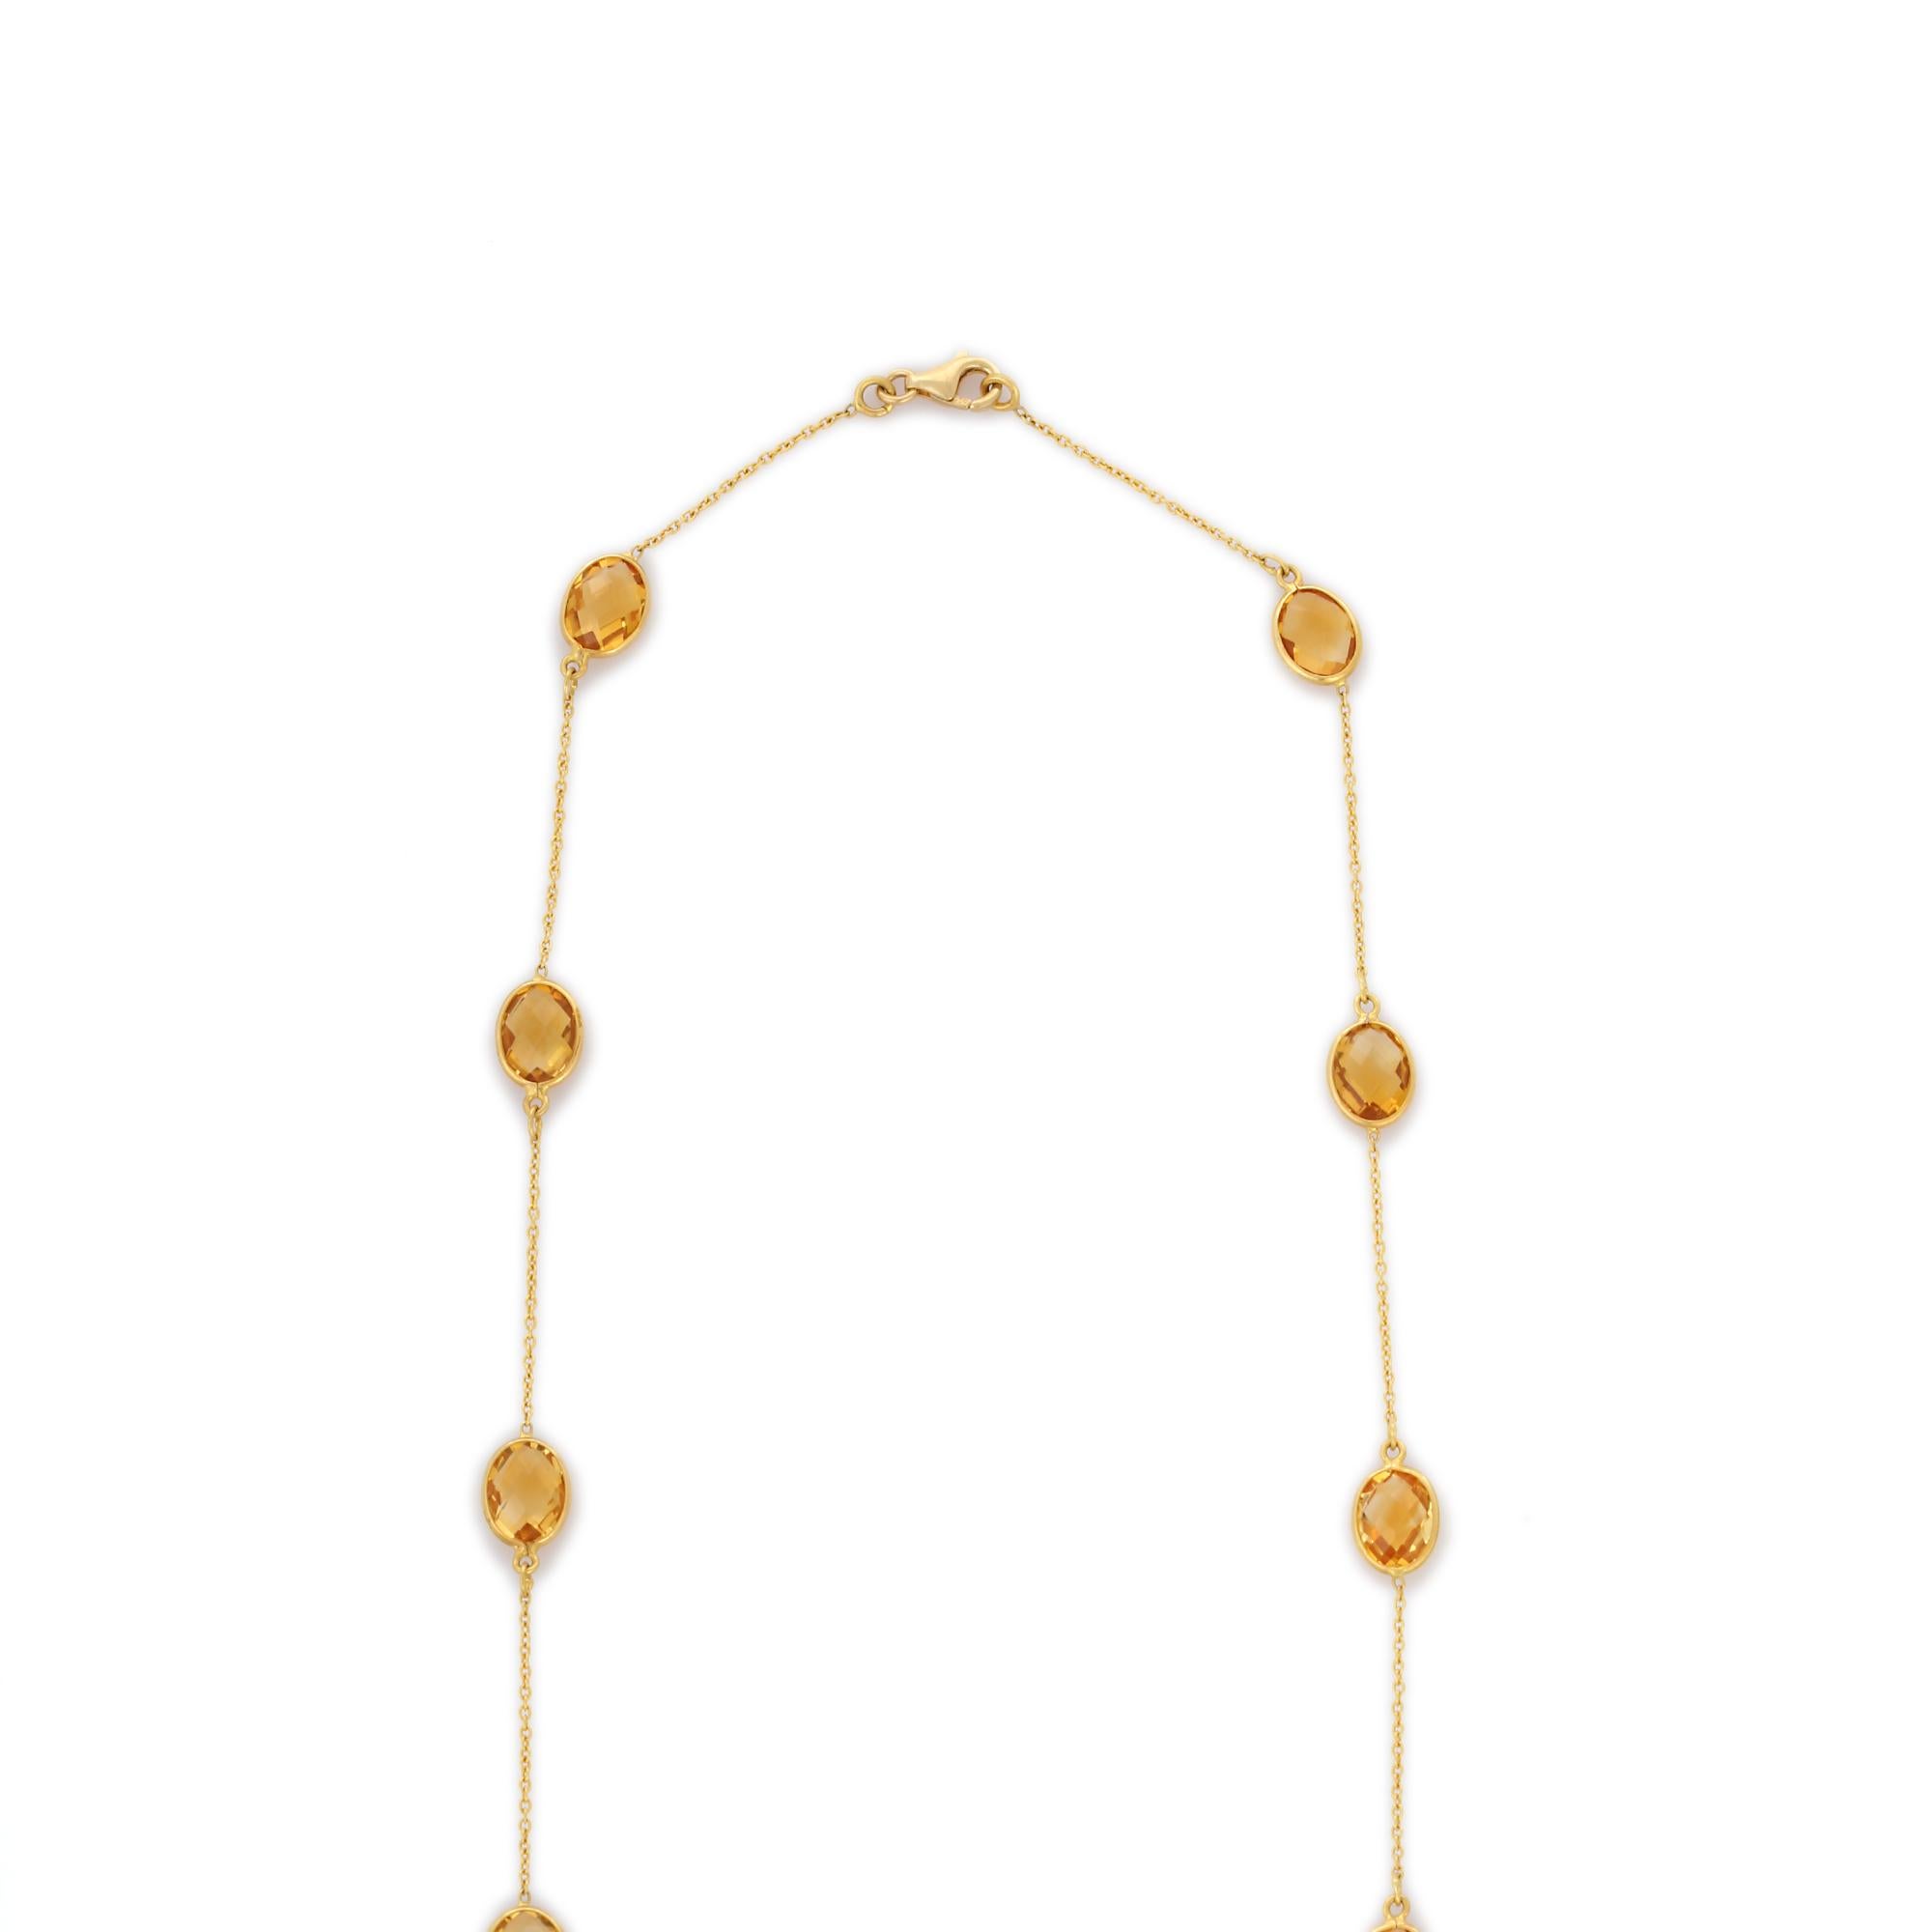 Citrine Chain Necklace in 18K Gold studded with oval cut citrine gemstones.
Accessorize your look with this elegant citrine chain necklace. This stunning piece of jewelry instantly elevates a casual look or dressy outfit. Comfortable and easy to